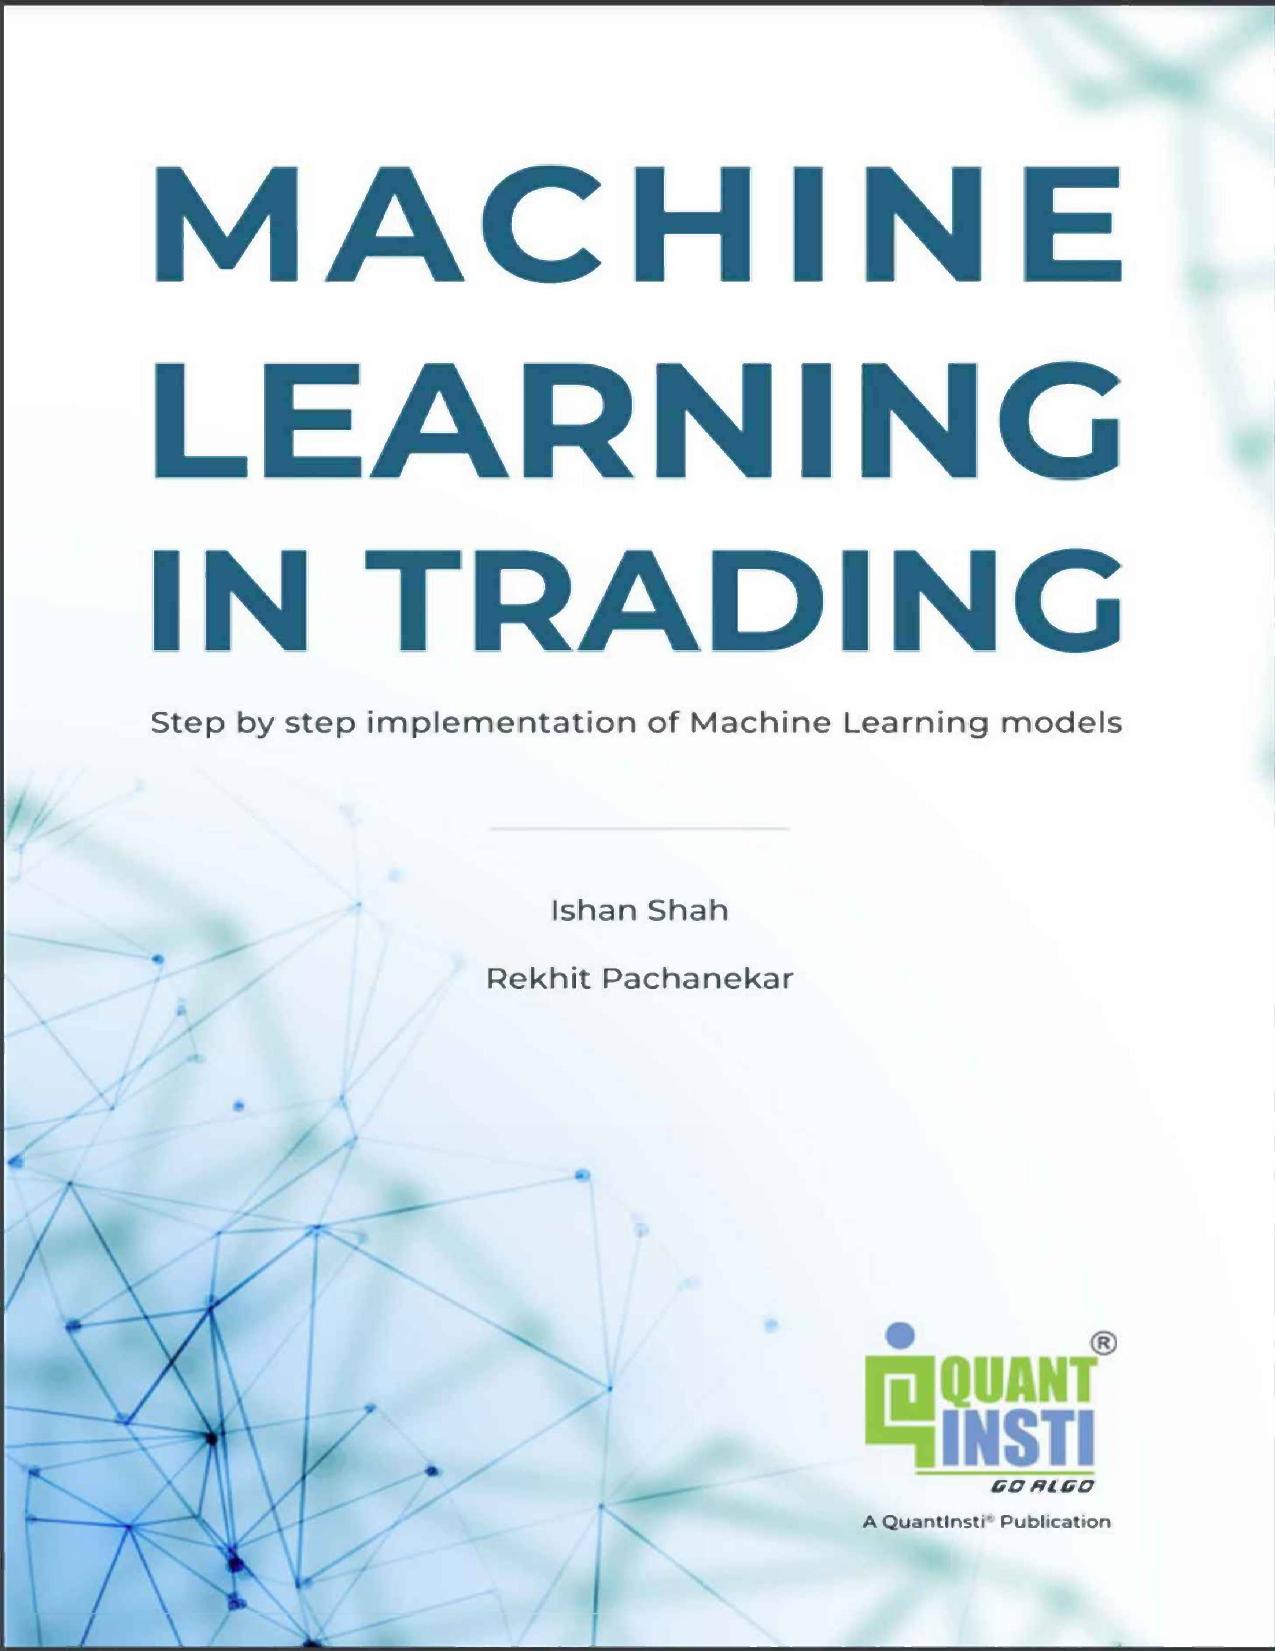 Machine Learning in Trading by Quantitative Learning QuantInsti